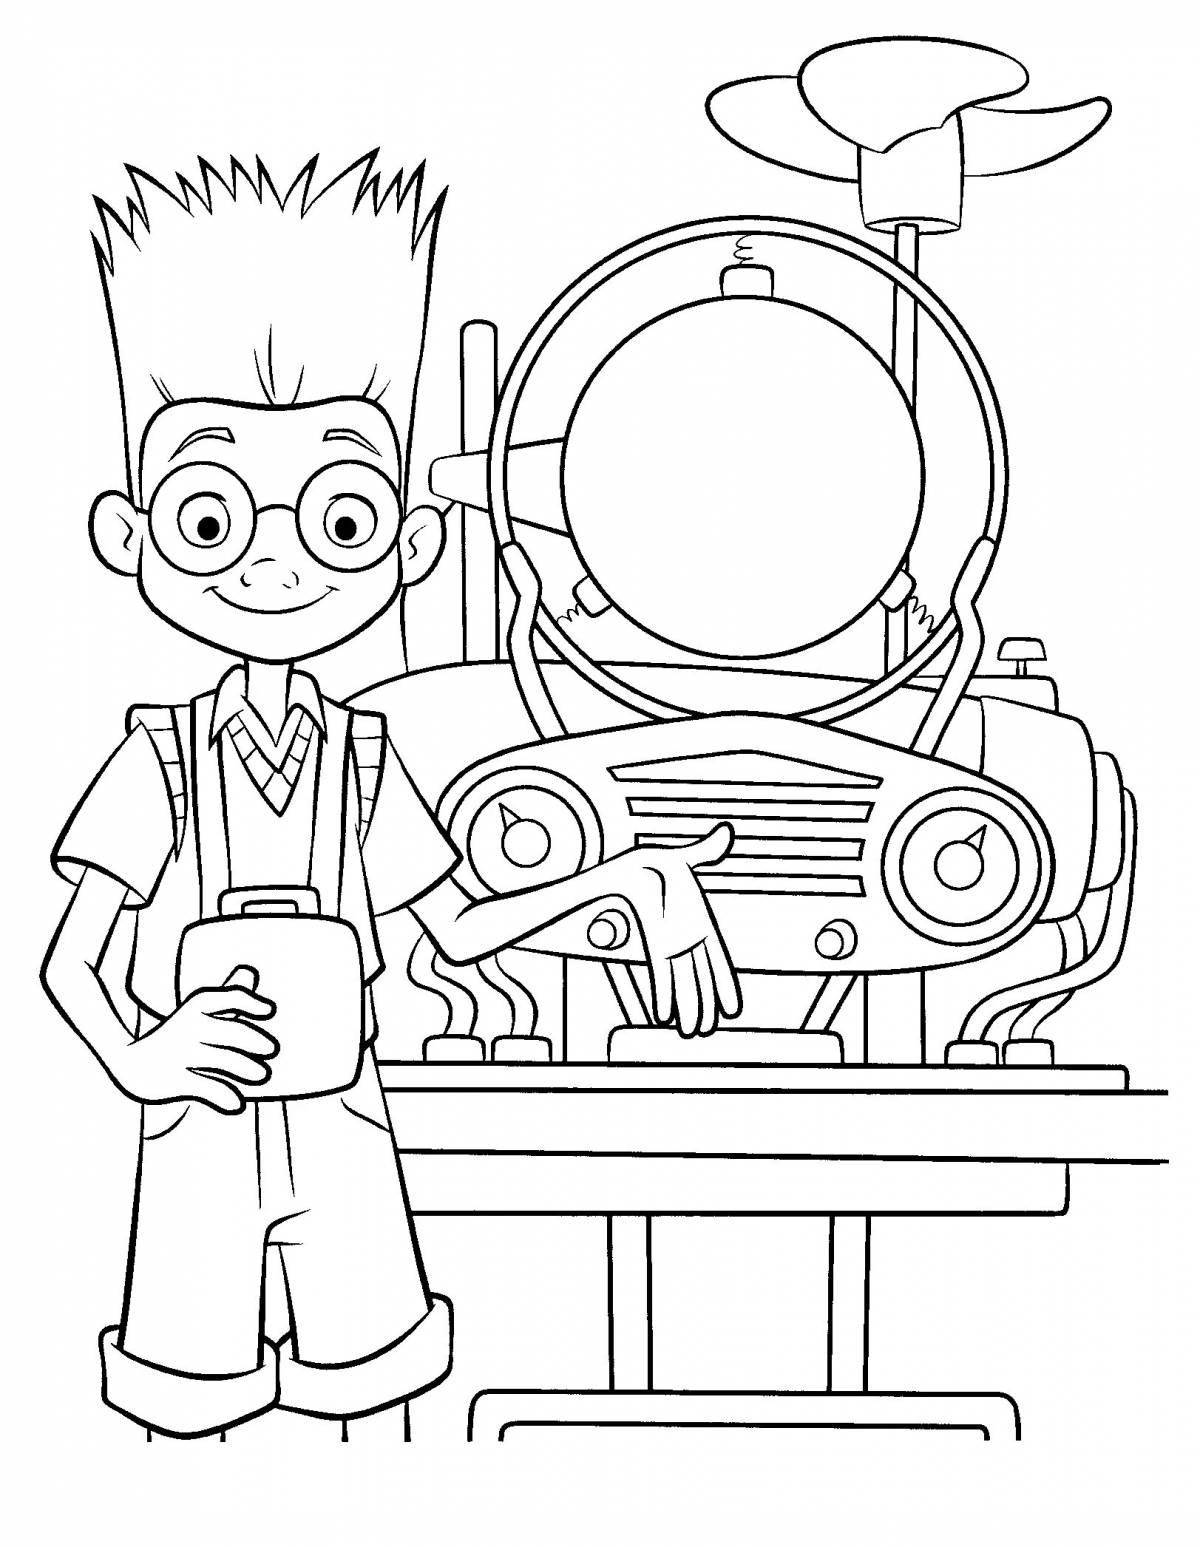 Fun science coloring book for kids